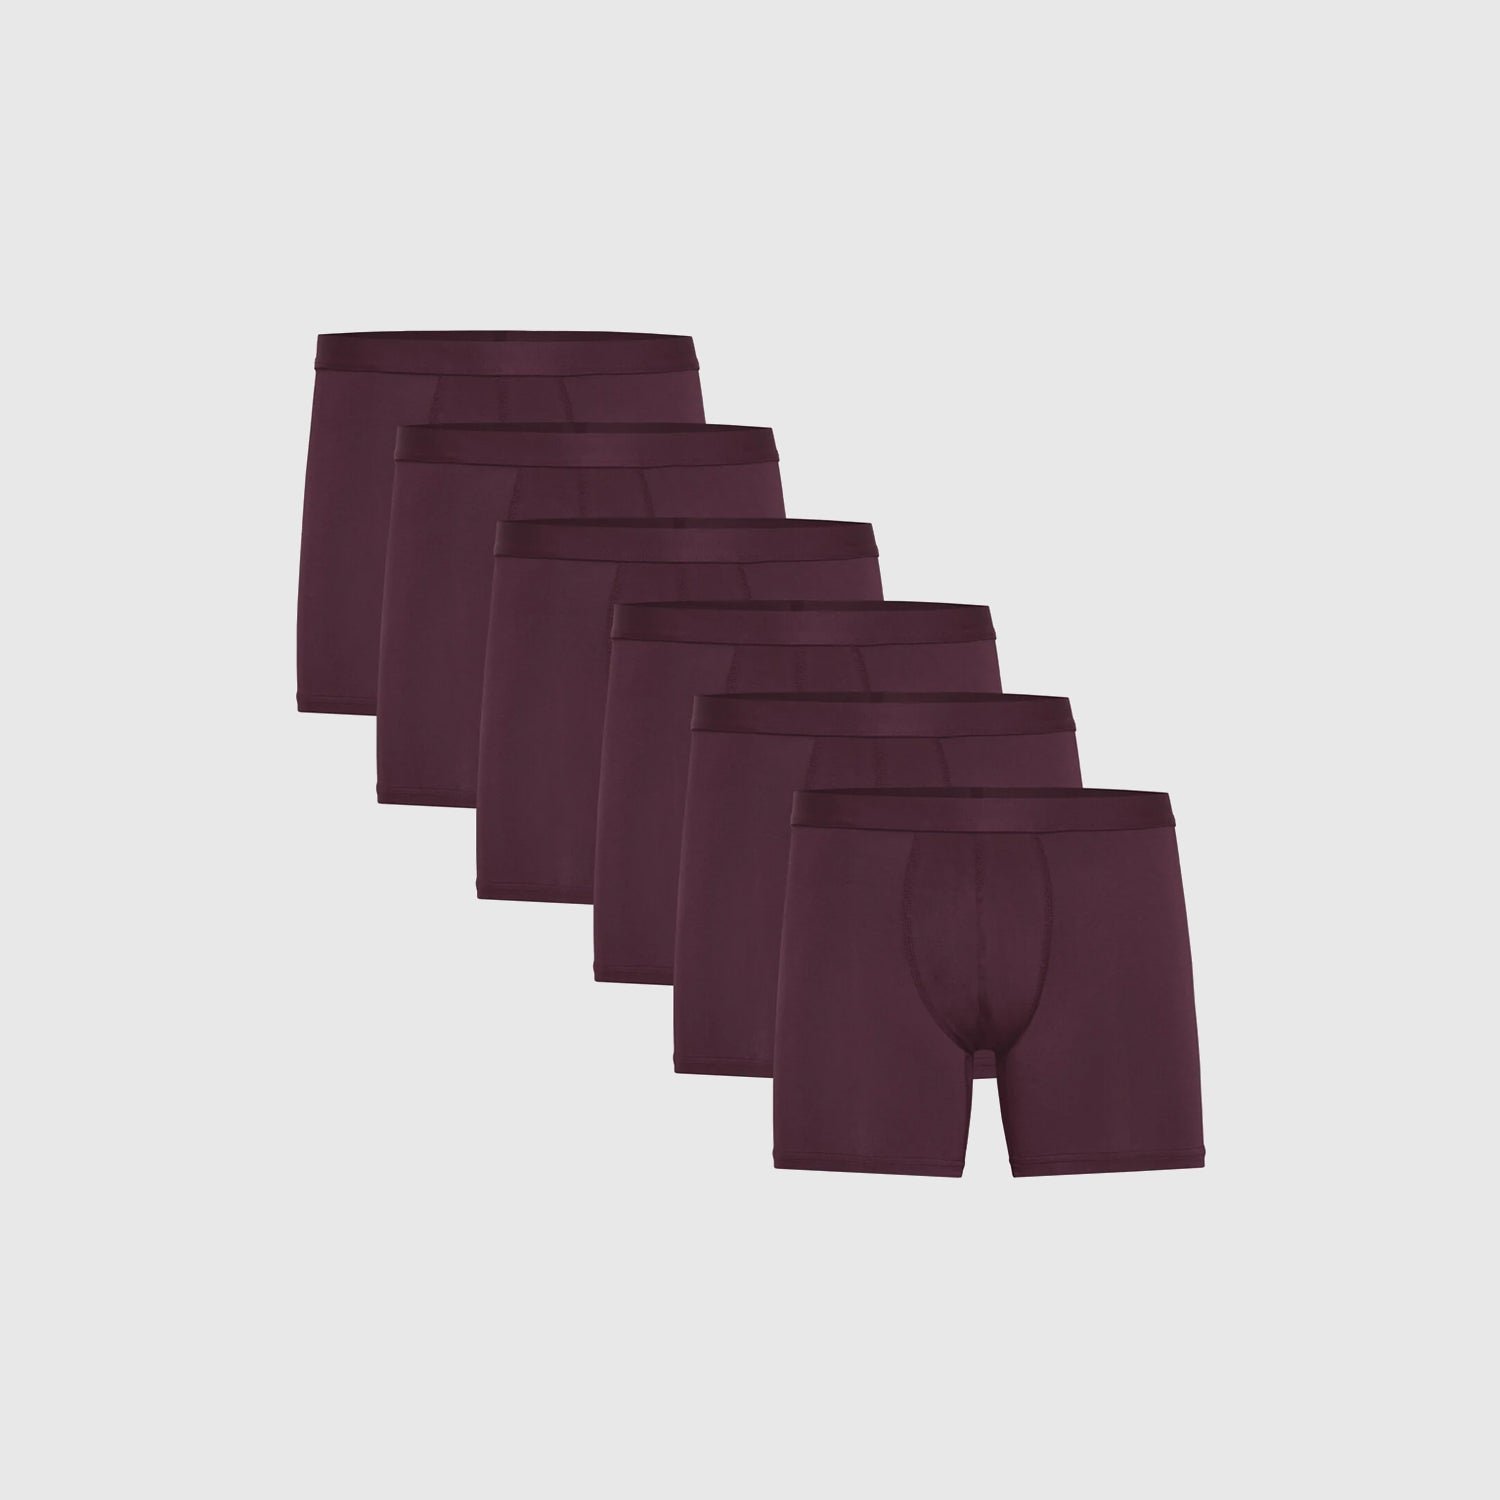 The Purple Brief 6-Pack